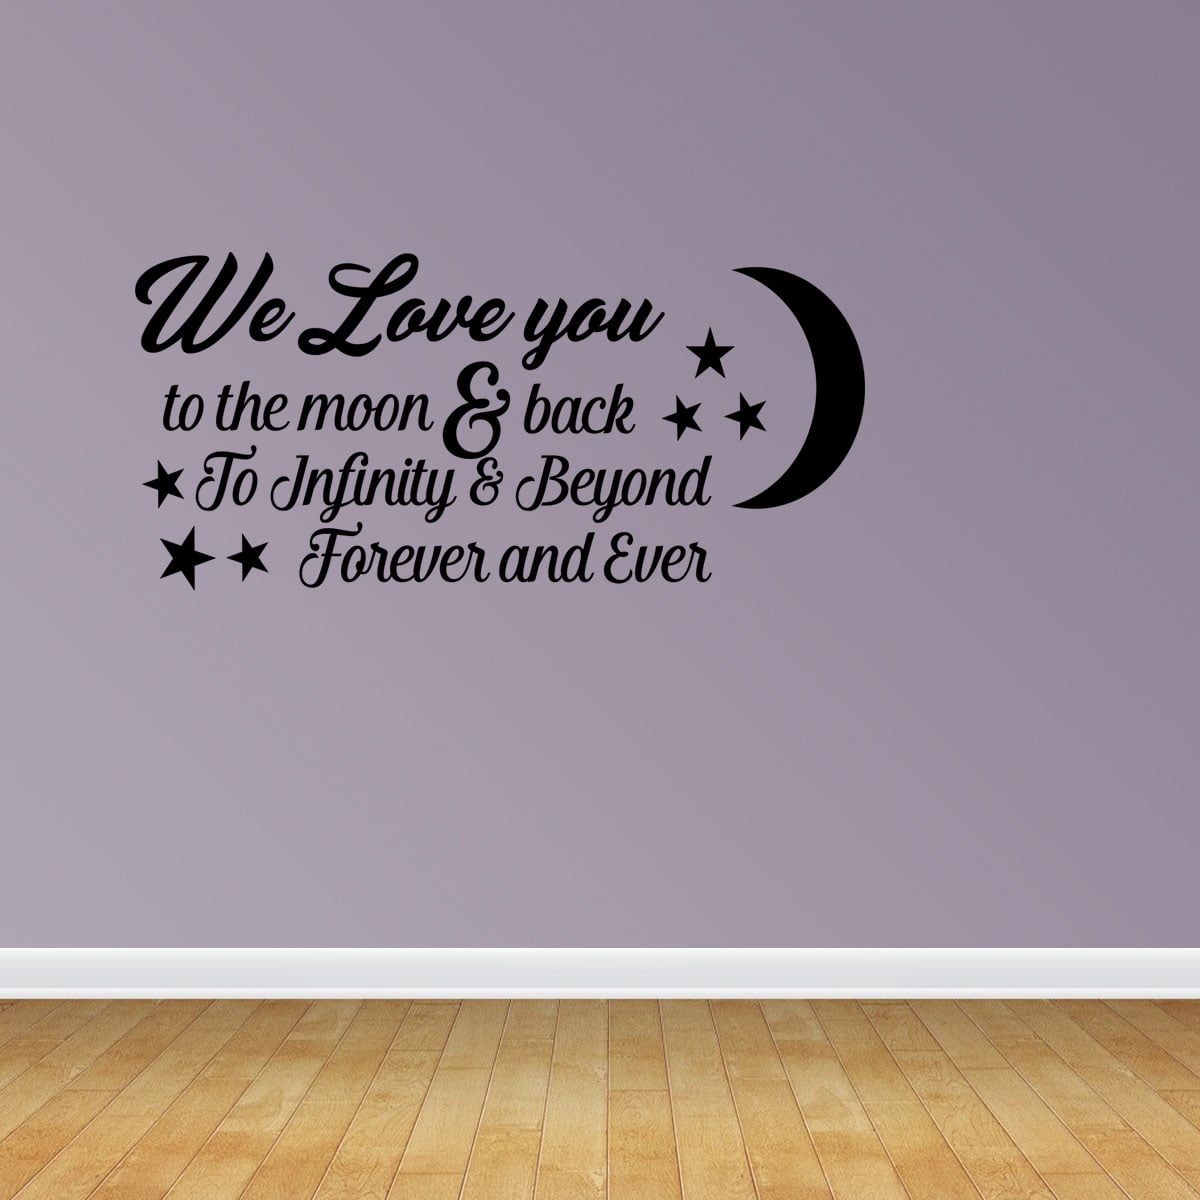 Design with Vinyl JER 1934 1 Hot New Decals I Love You To The Moon And Back Wall Art Size 12 Inches x 18 Inches Color 12 x 18, Black